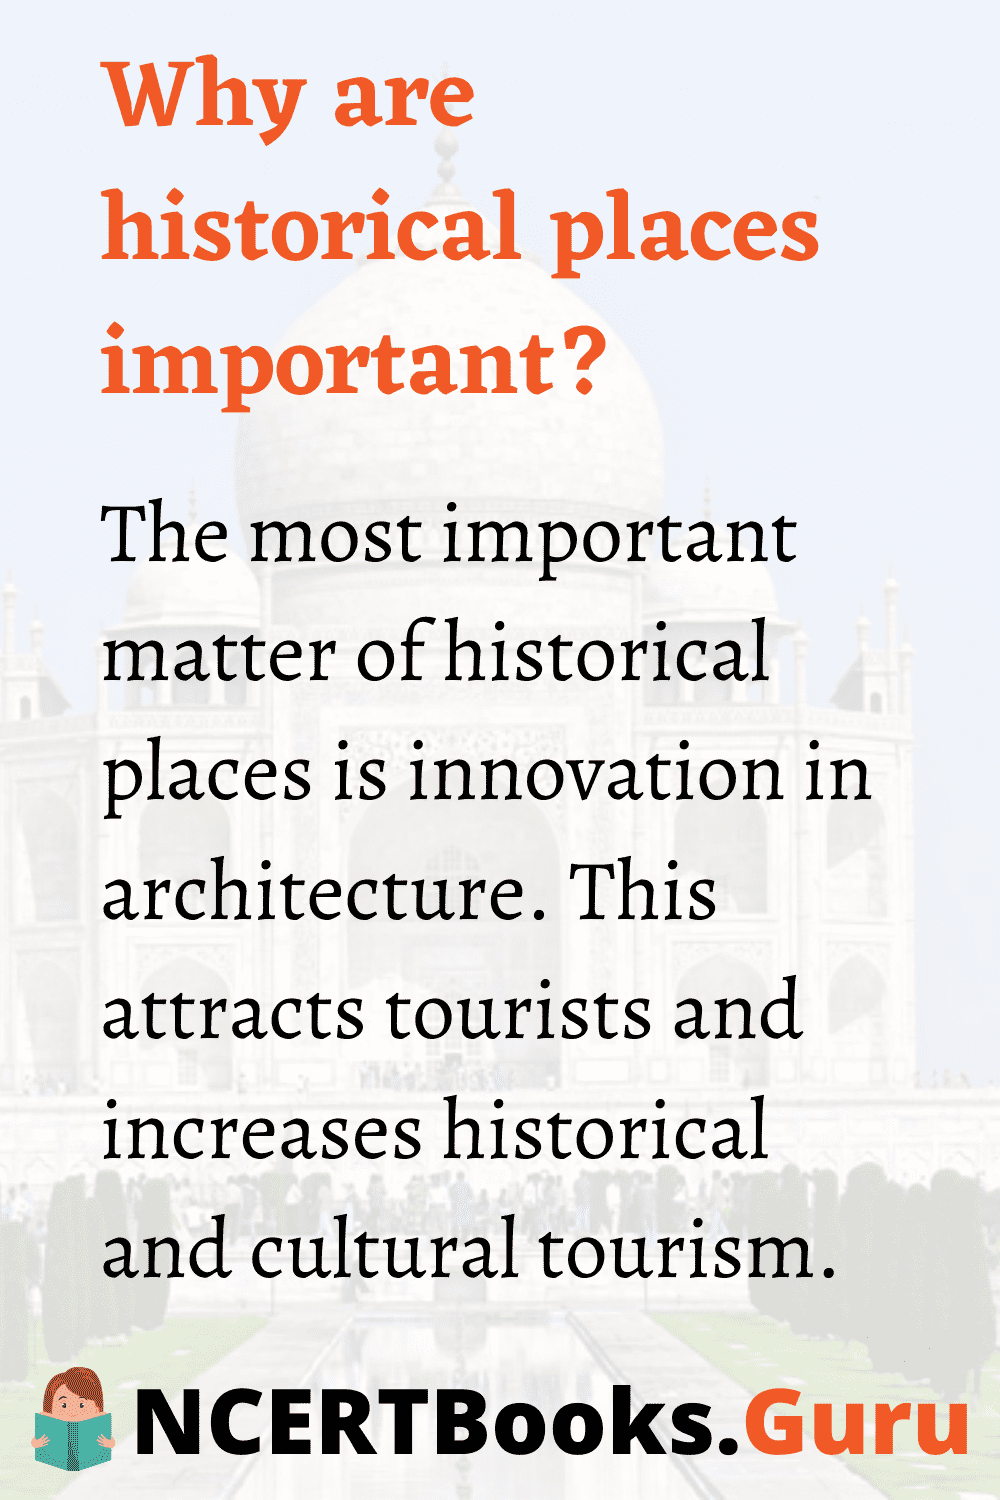 Importance of Historic Places